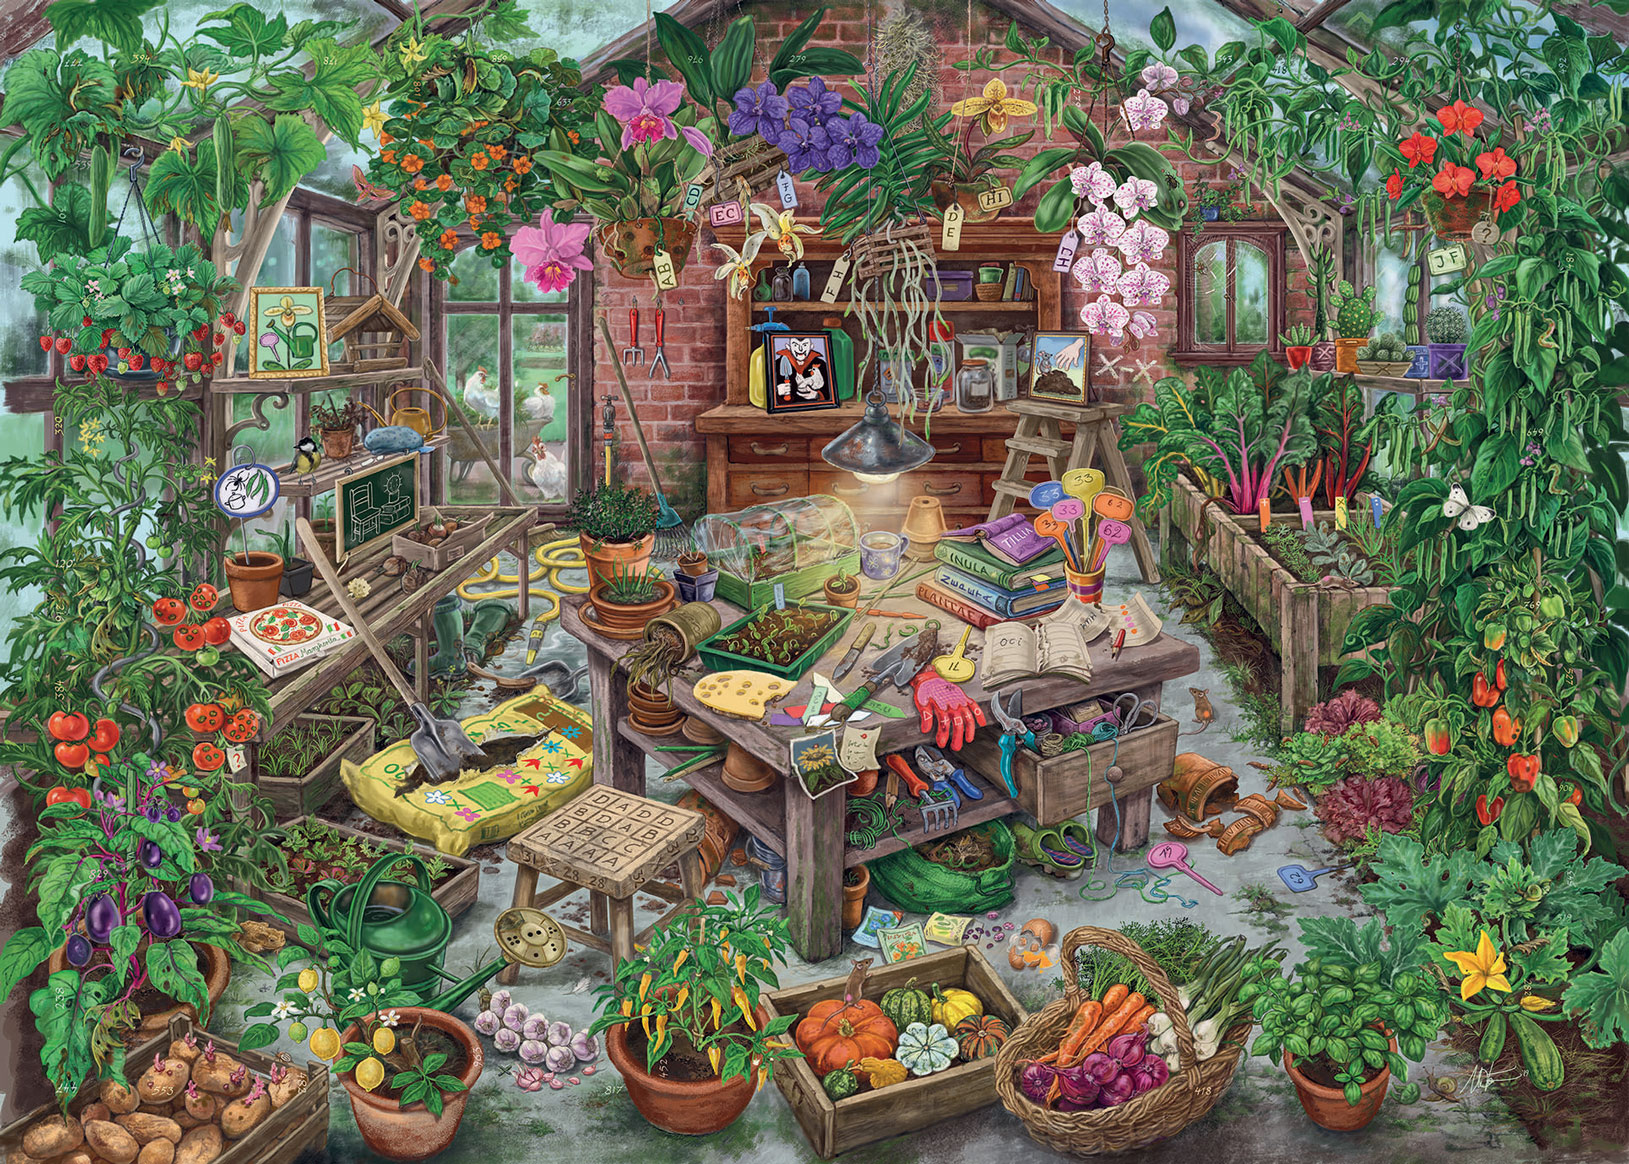 The Cursed Greenhouse Flower & Garden Jigsaw Puzzle